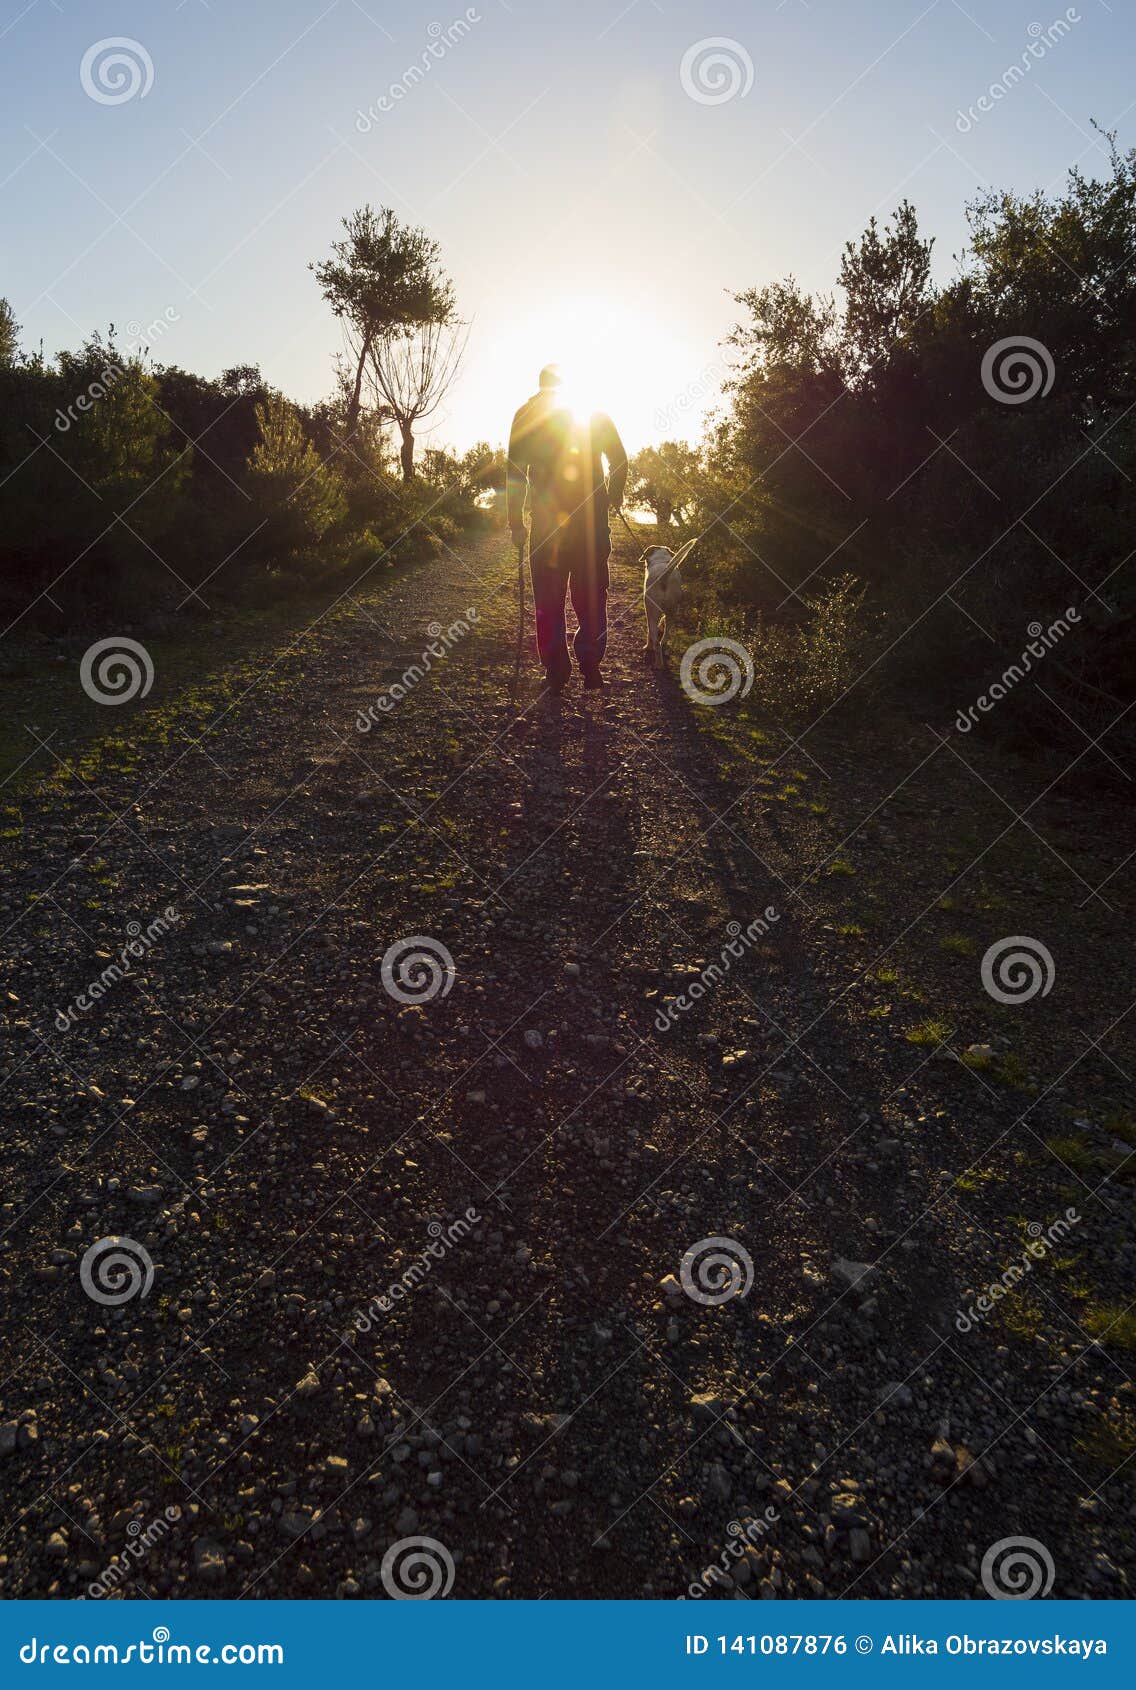 Beautiful Sunset Against The Sun And A Man Walking With A Dog In